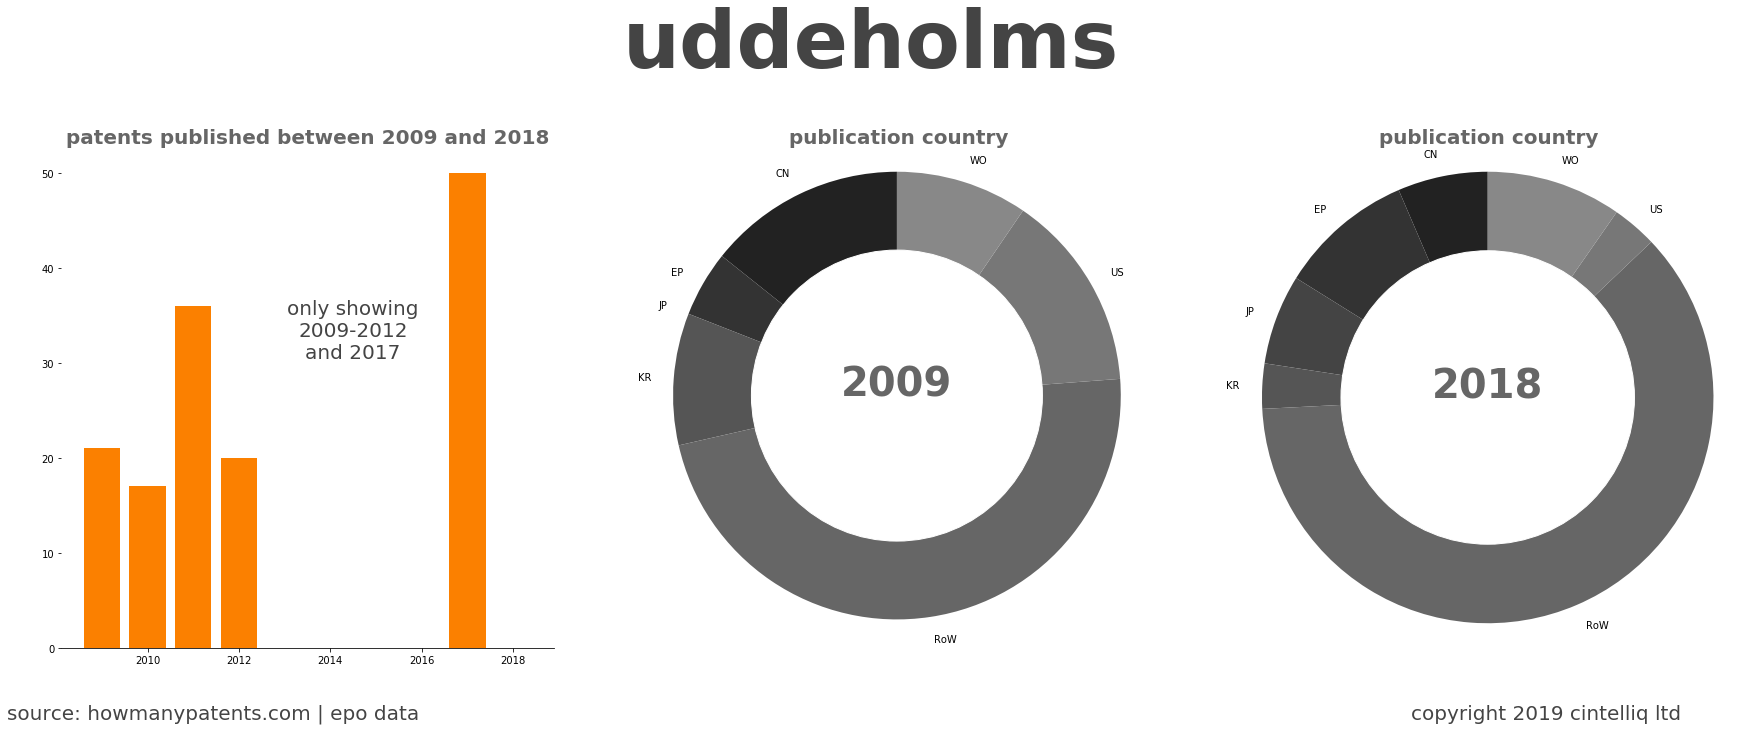 summary of patents for Uddeholms